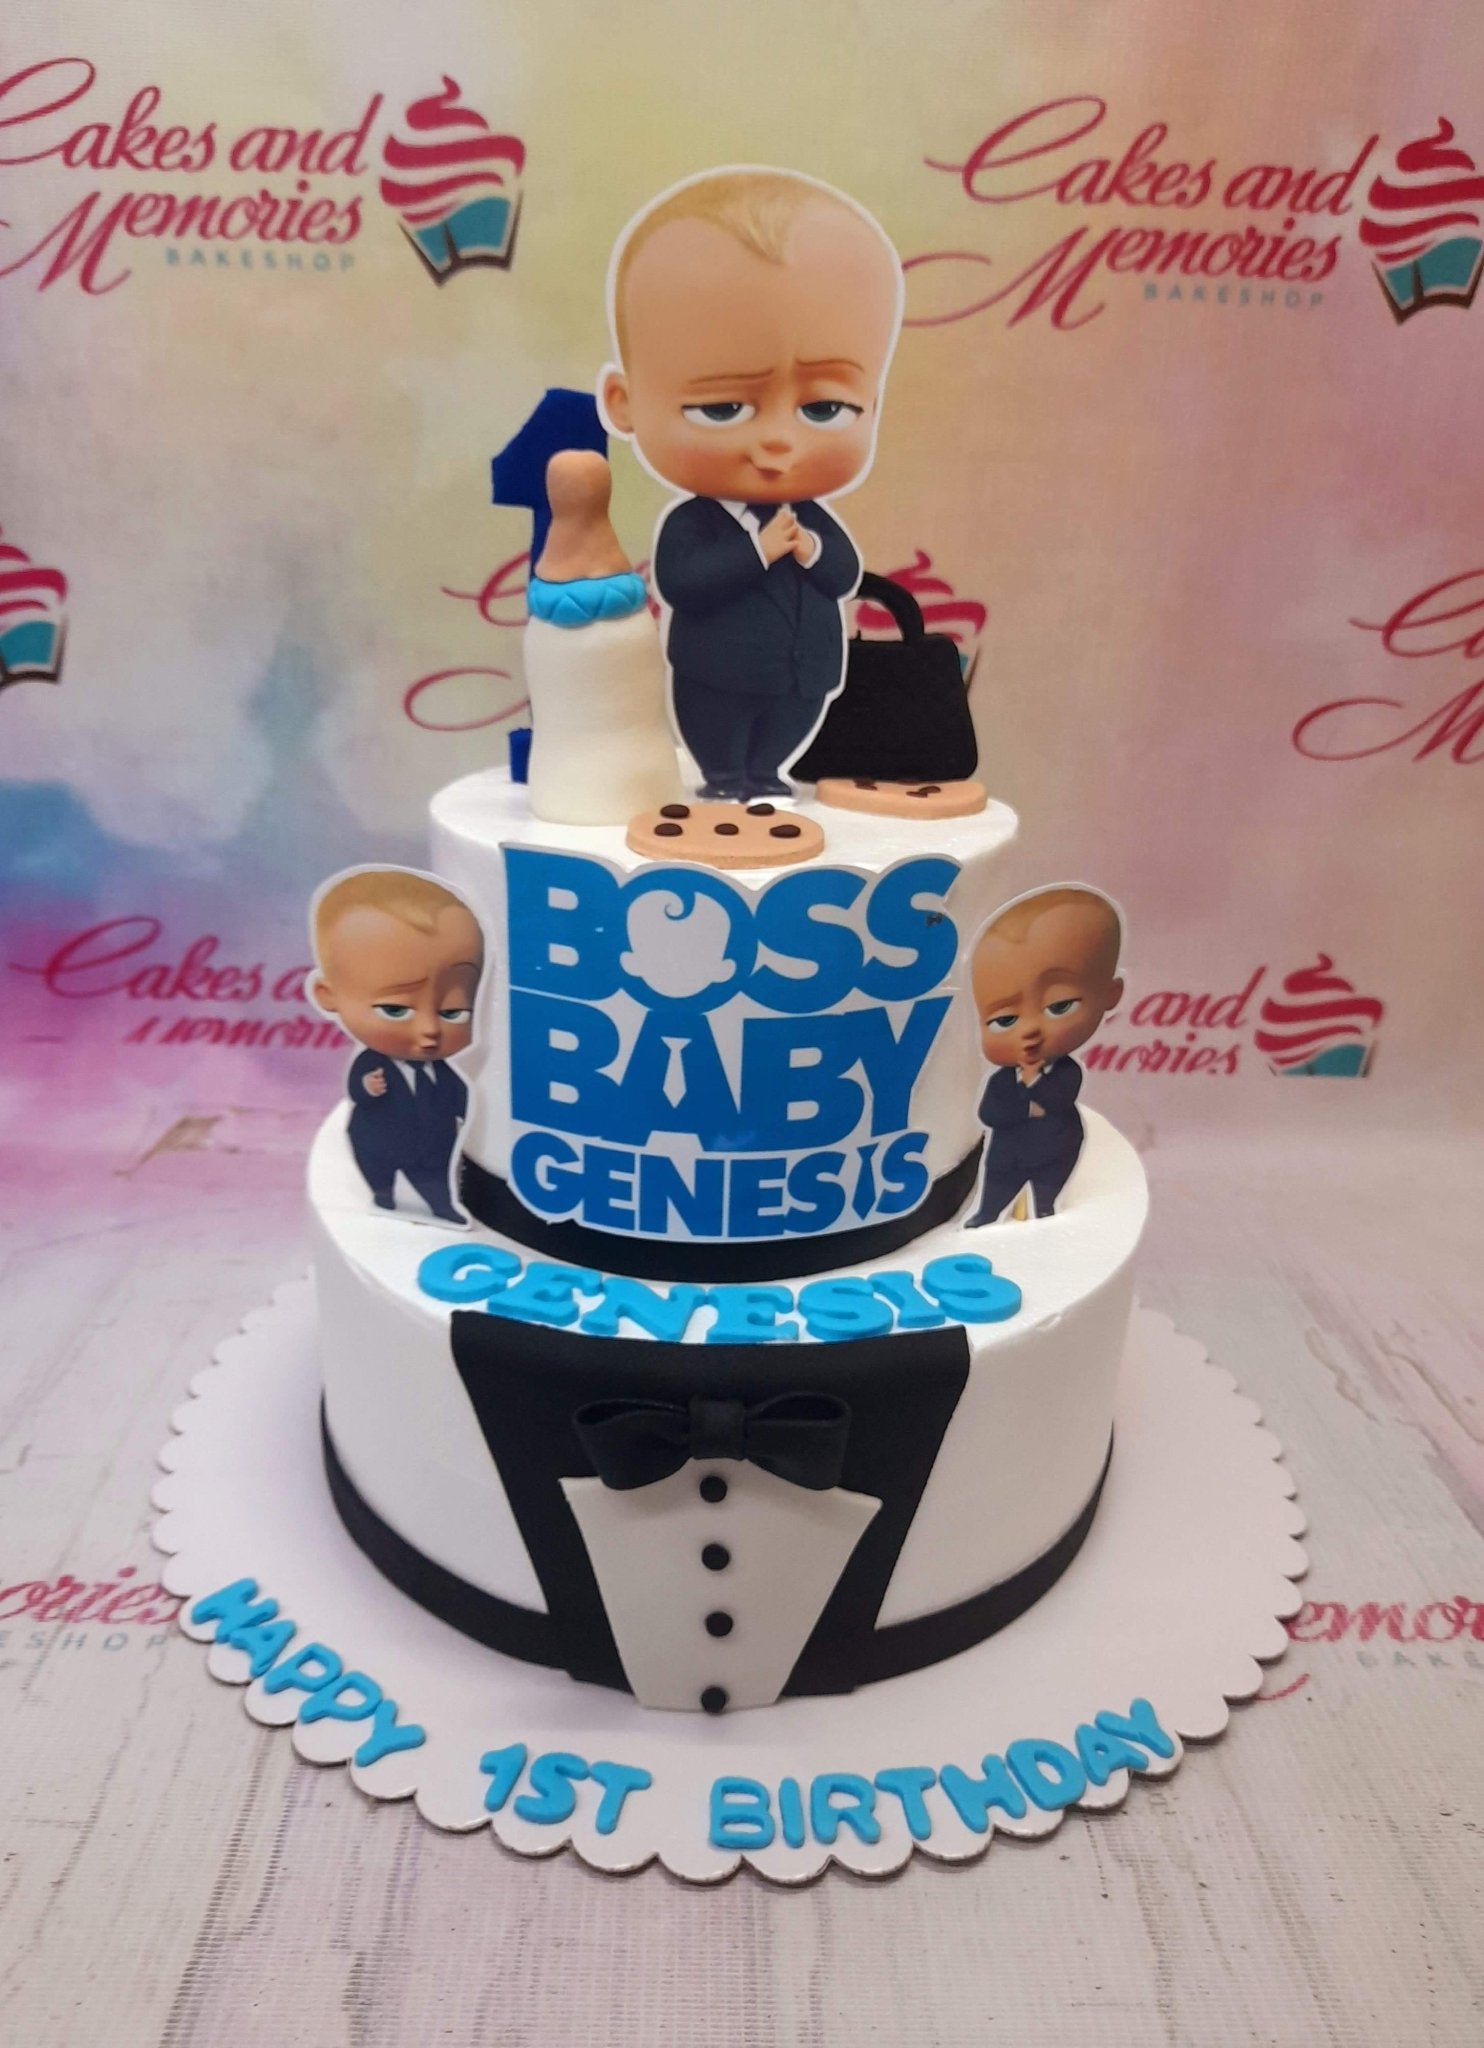 Boss Baby theme cake for 1st birthday - Decorated Cake by - CakesDecor